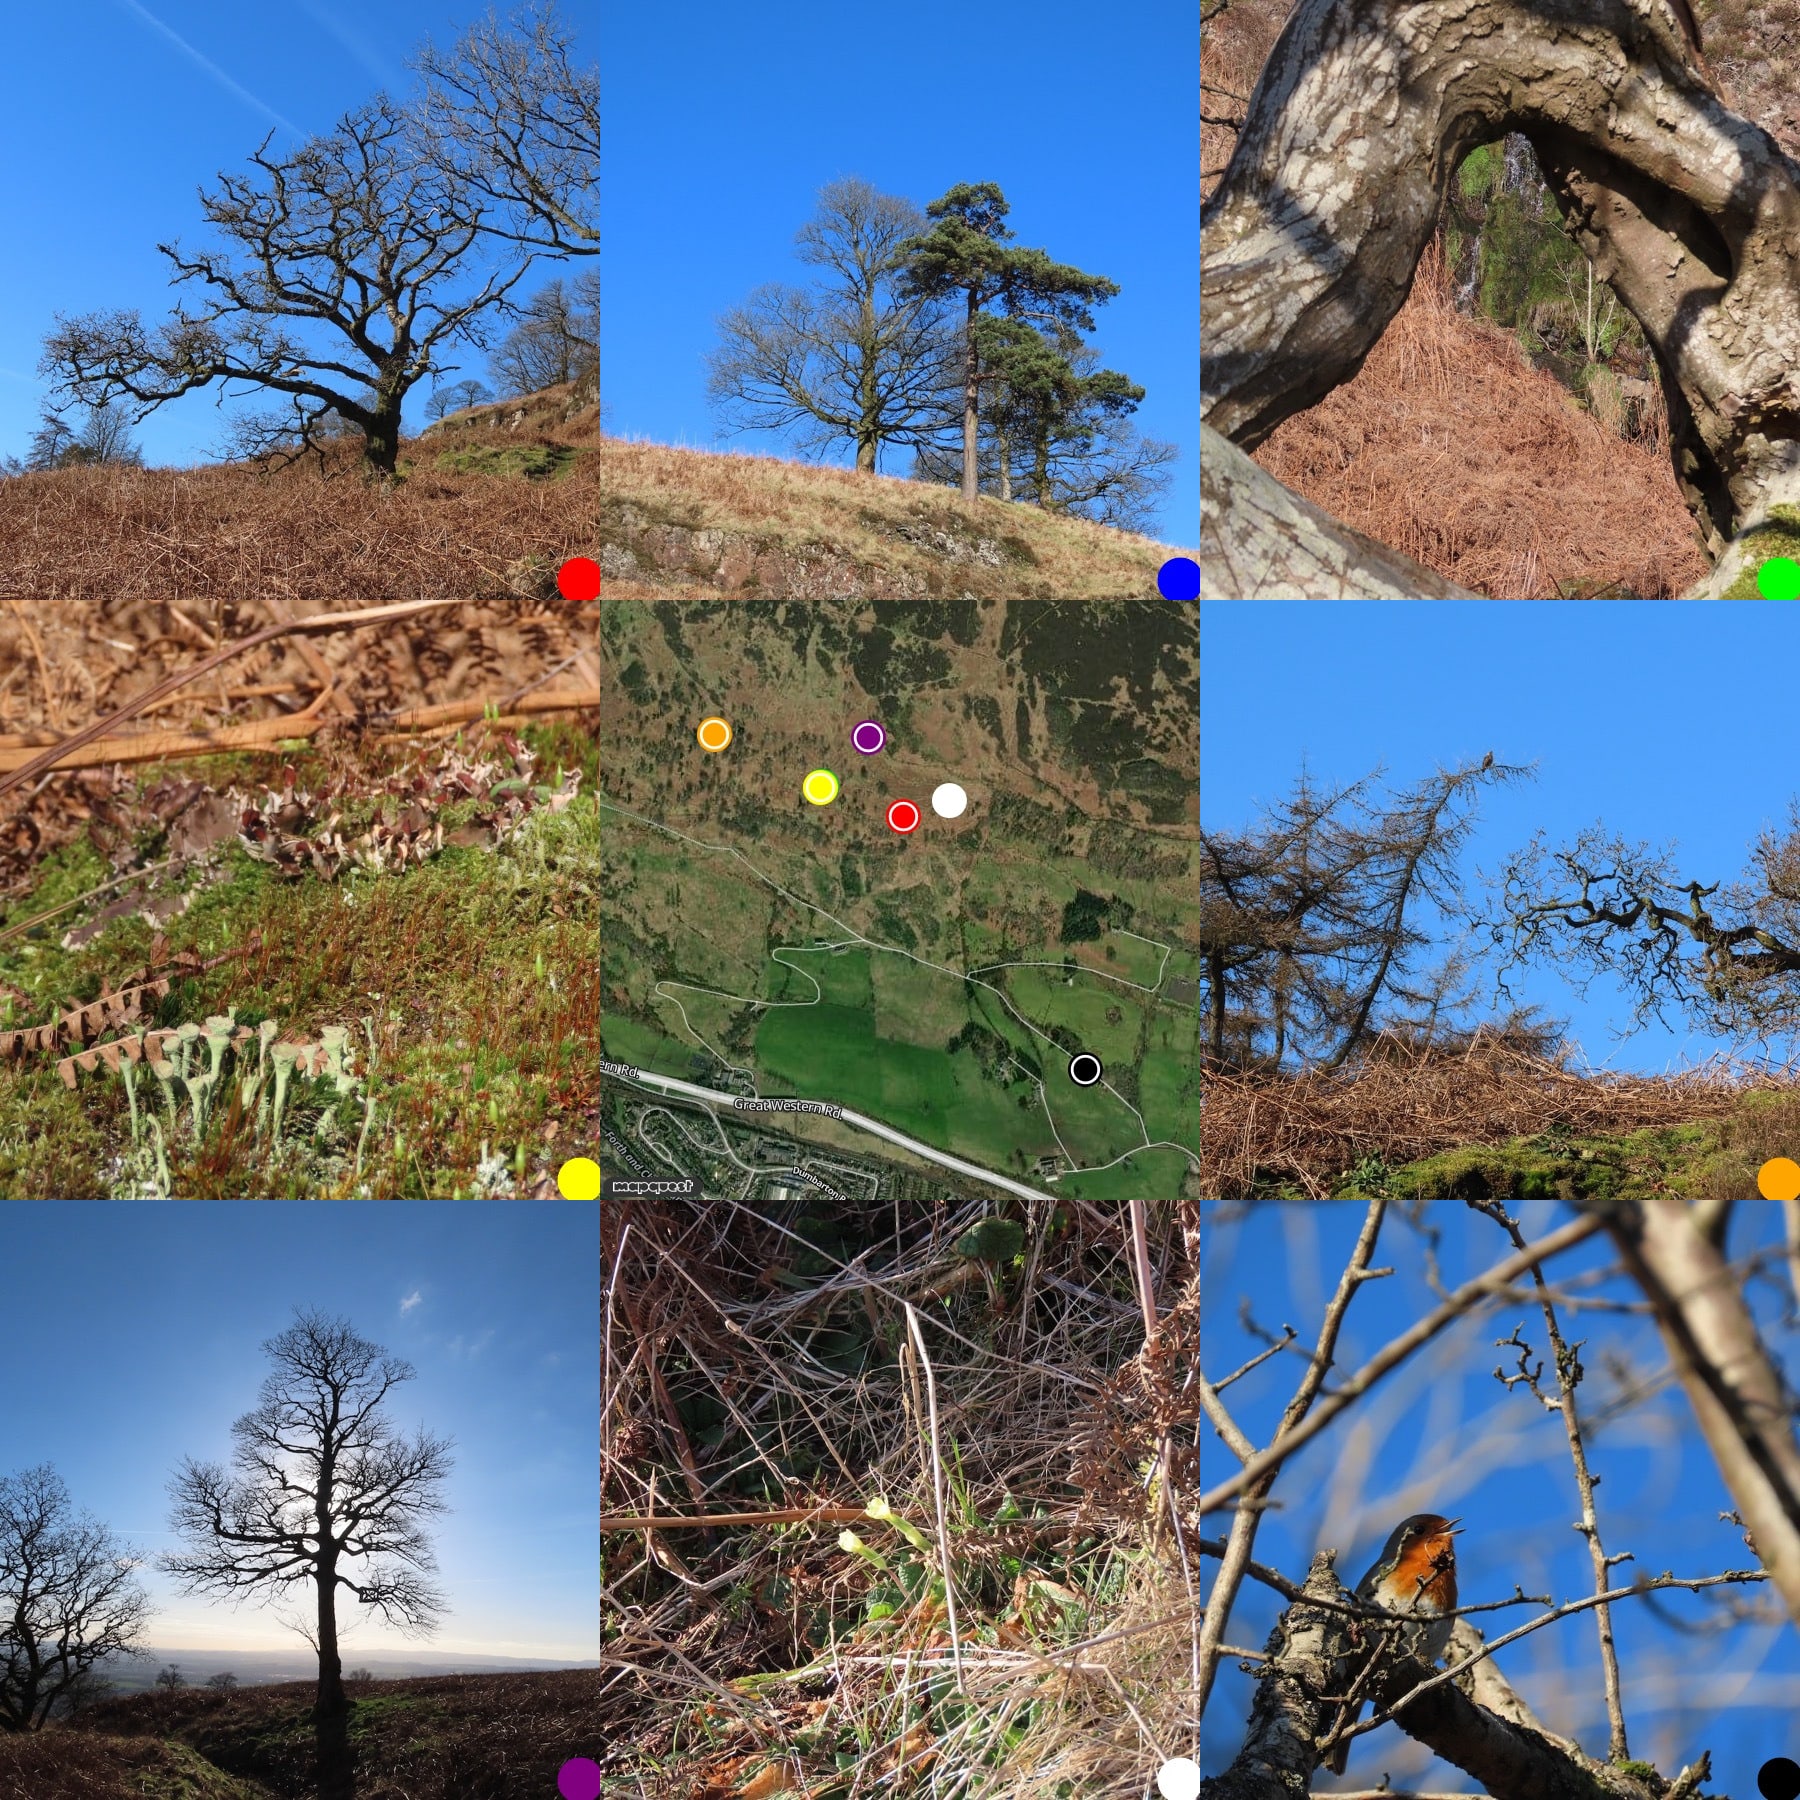 Grid of photos round a map of where they were taken. From top left: oak tree blue sky;Scots pine blue sky; through a ben in a branch a small waterfall; moss and lichen on a rock;the map; a buzzard in a larch tree; tree against the sky, sun behind it, primrose flowers; robin singing